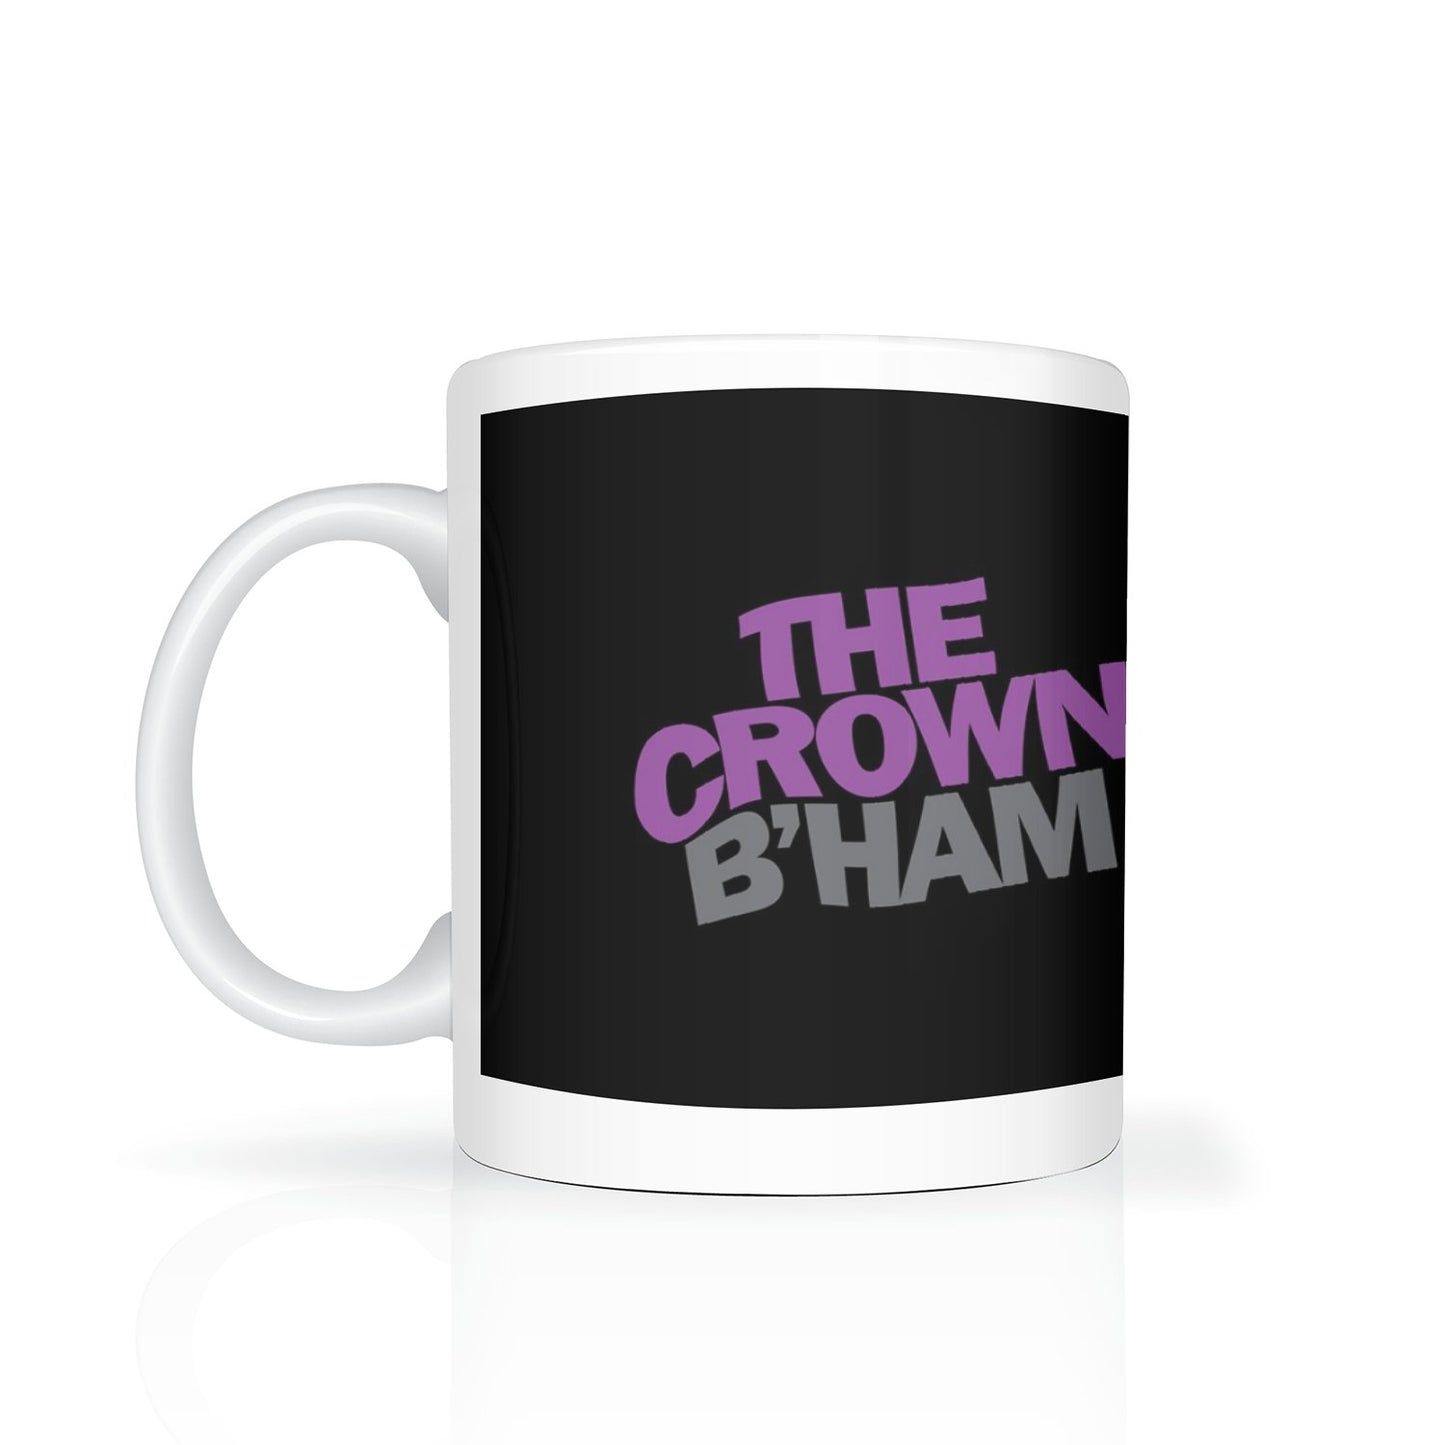 The Crown mug - Dirty Stop Outs